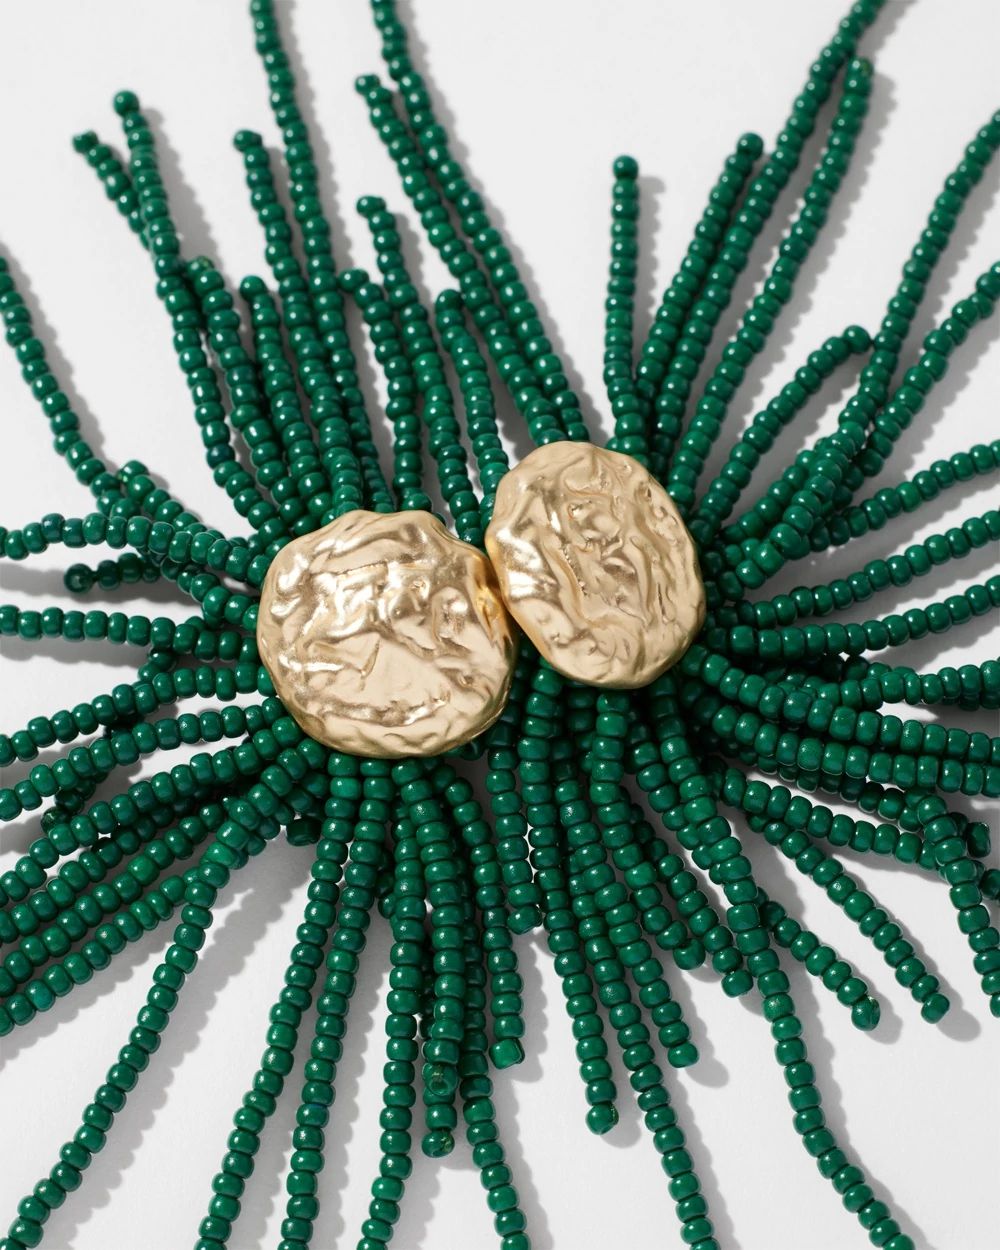 Green Seed Bead Drop Earrings click to view larger image.